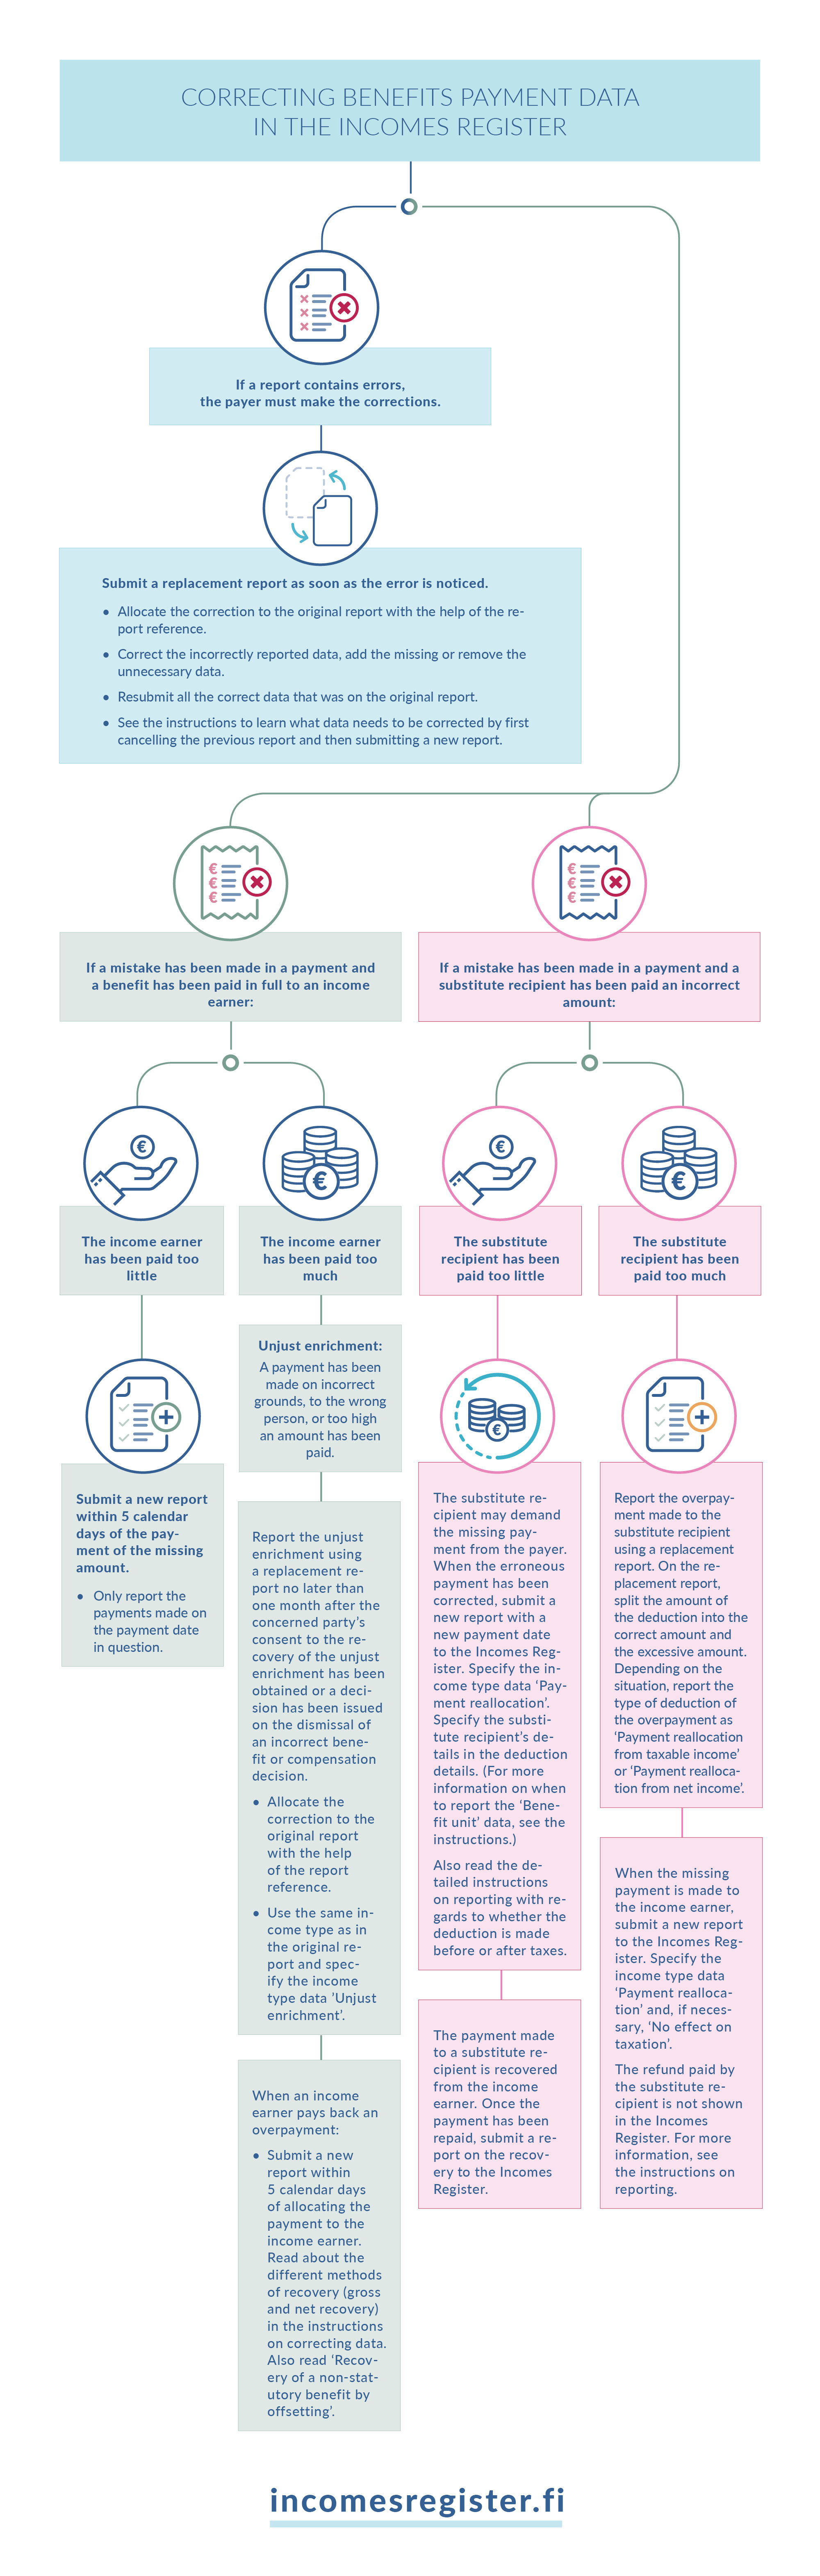 Infographic depicting how to correct benefits payment data in the Incomes Register.